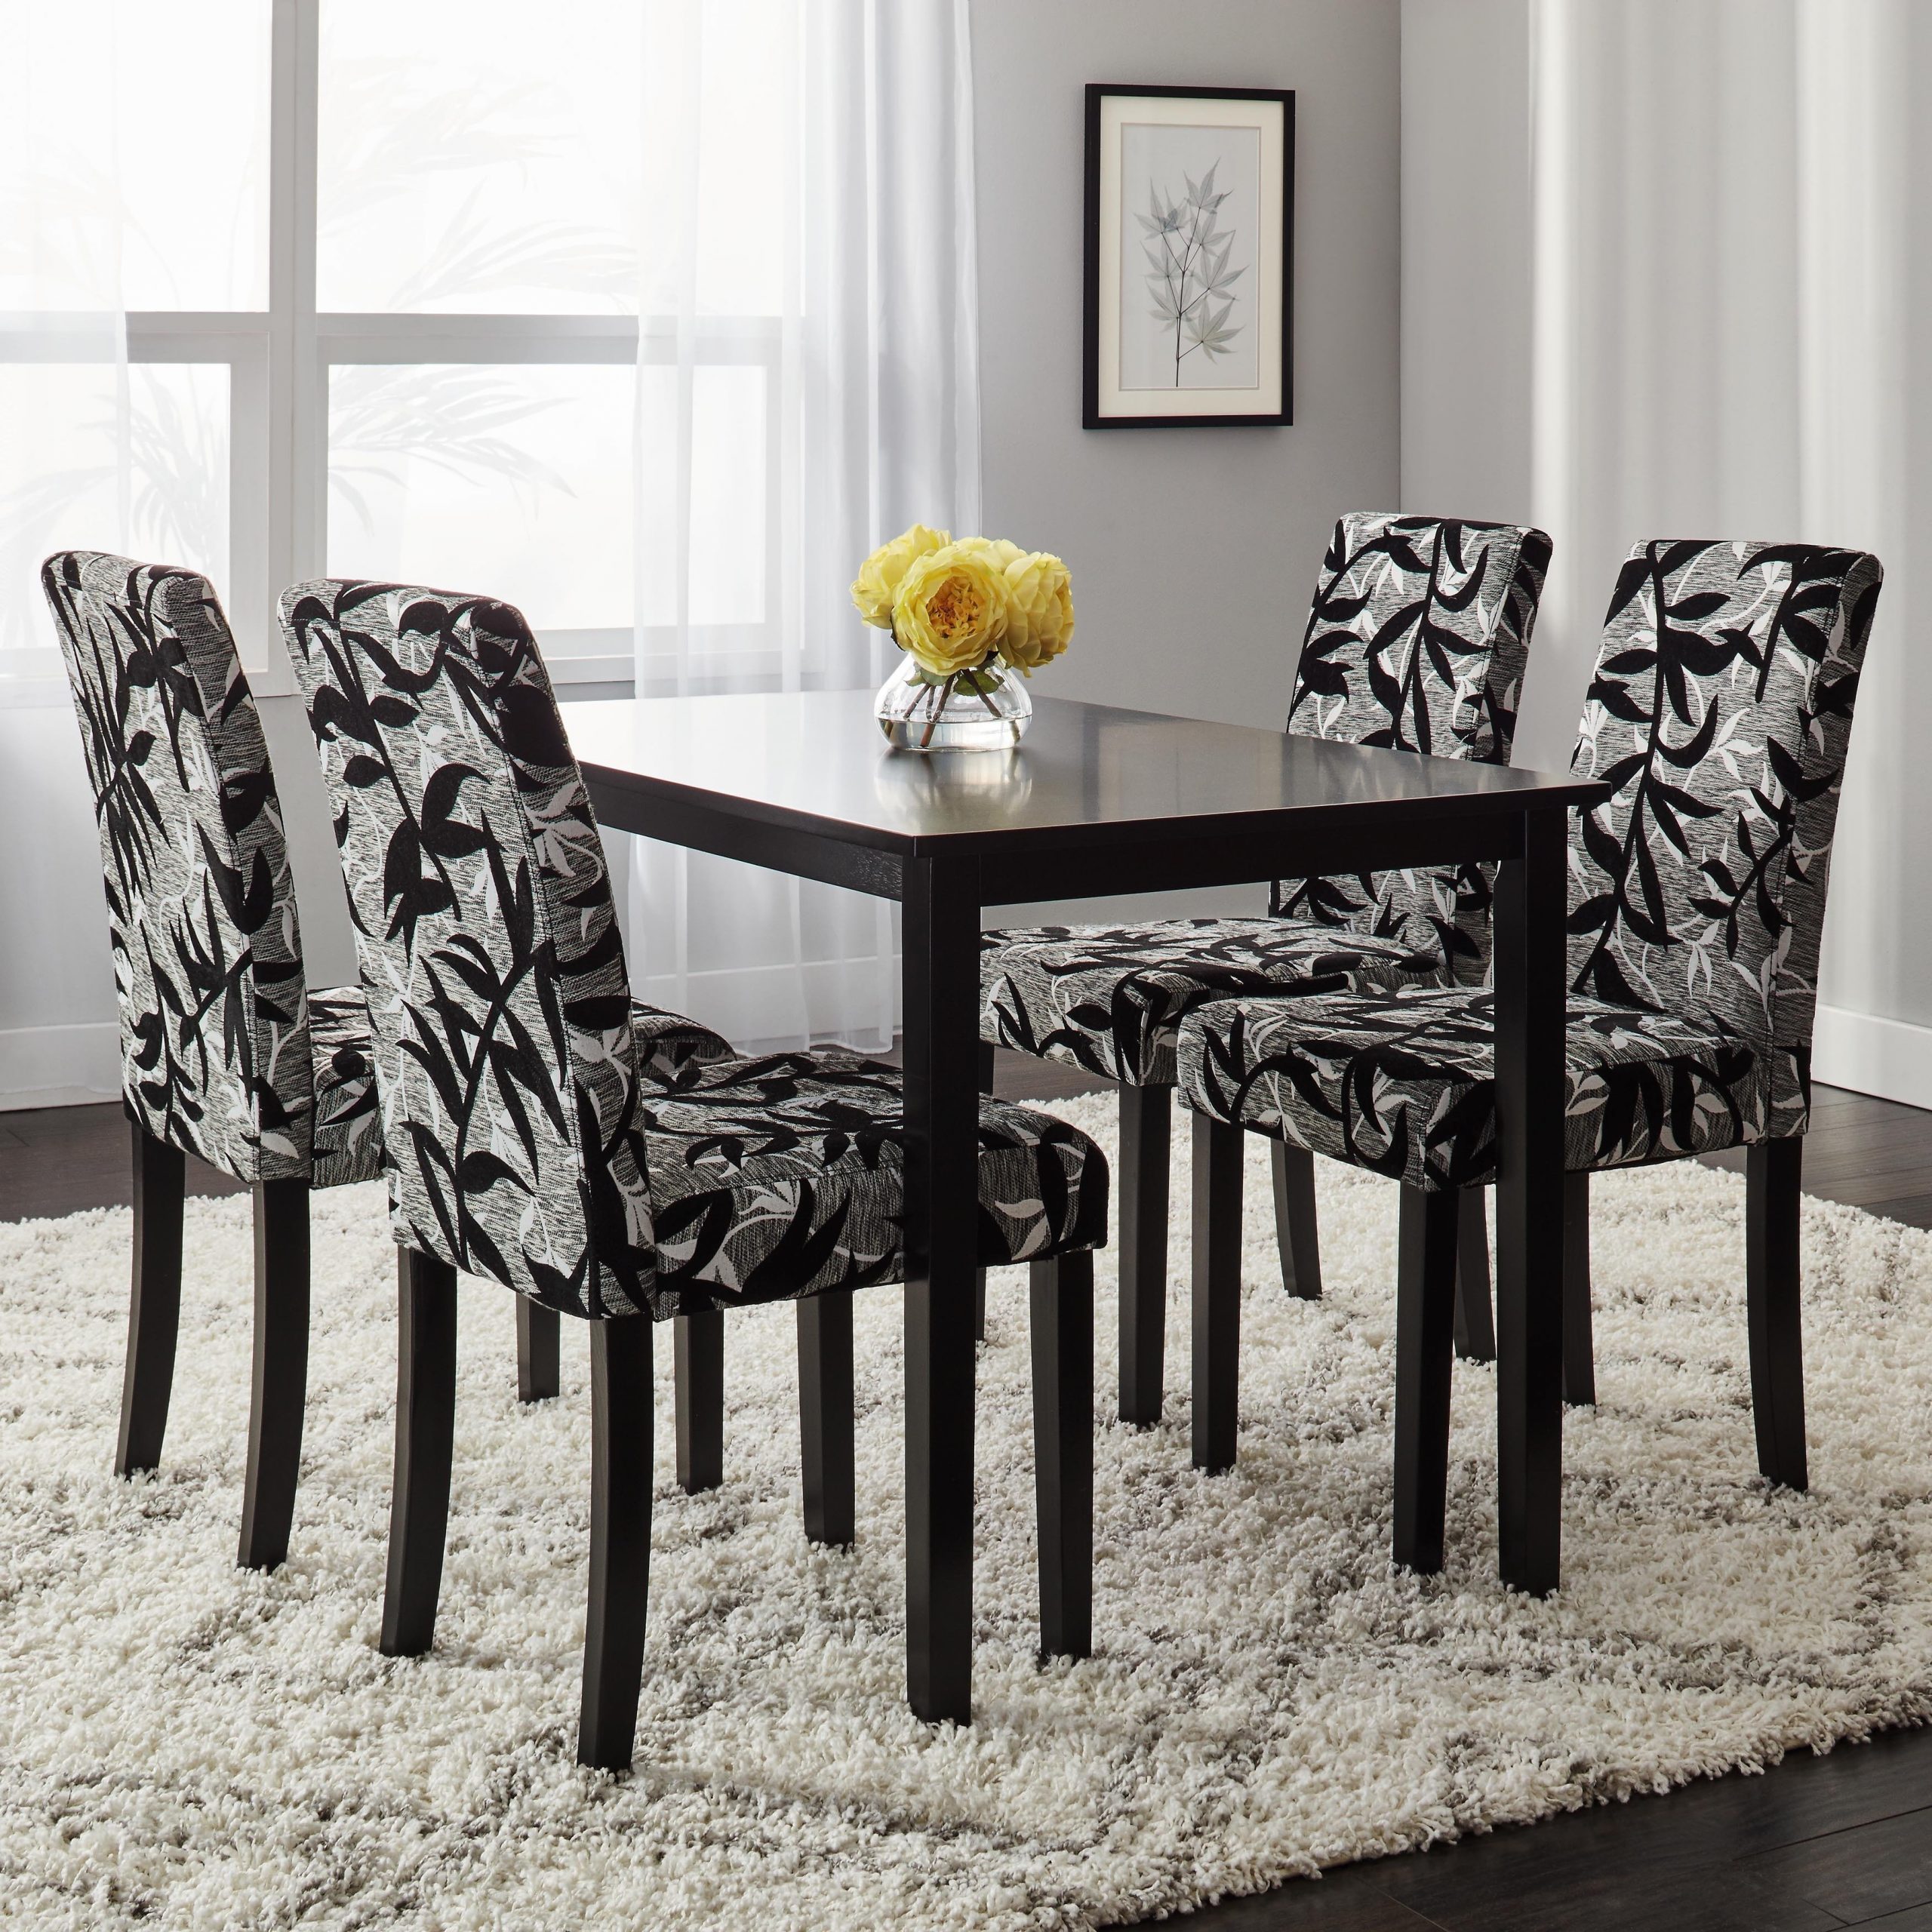 Chair Wondrous Kitchen Table And Chair Sets With pertaining to sizing 3500 X 3500